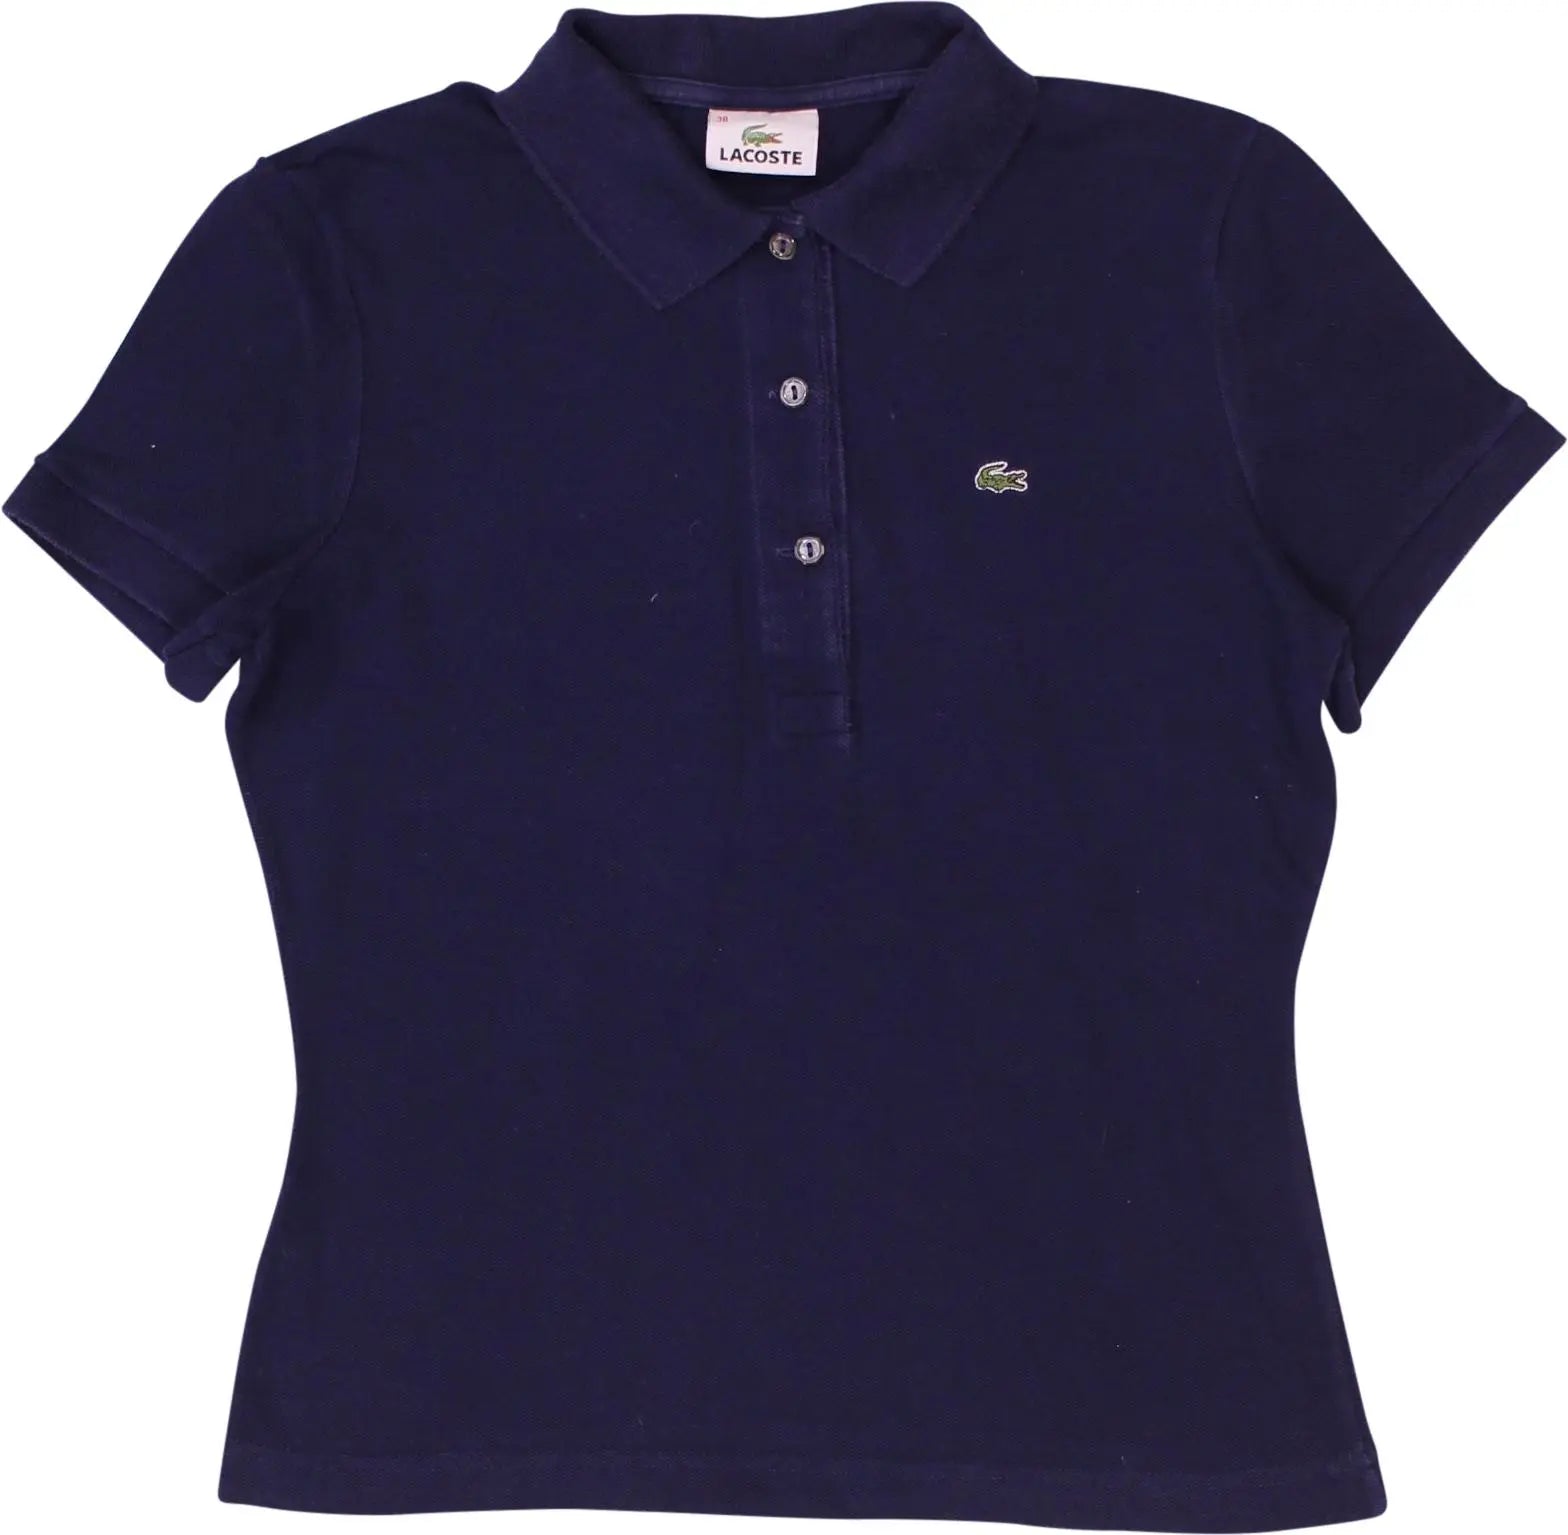 Lacoste - Blue Short Sleeve Polo Shirt by Lacoste- ThriftTale.com - Vintage and second handclothing